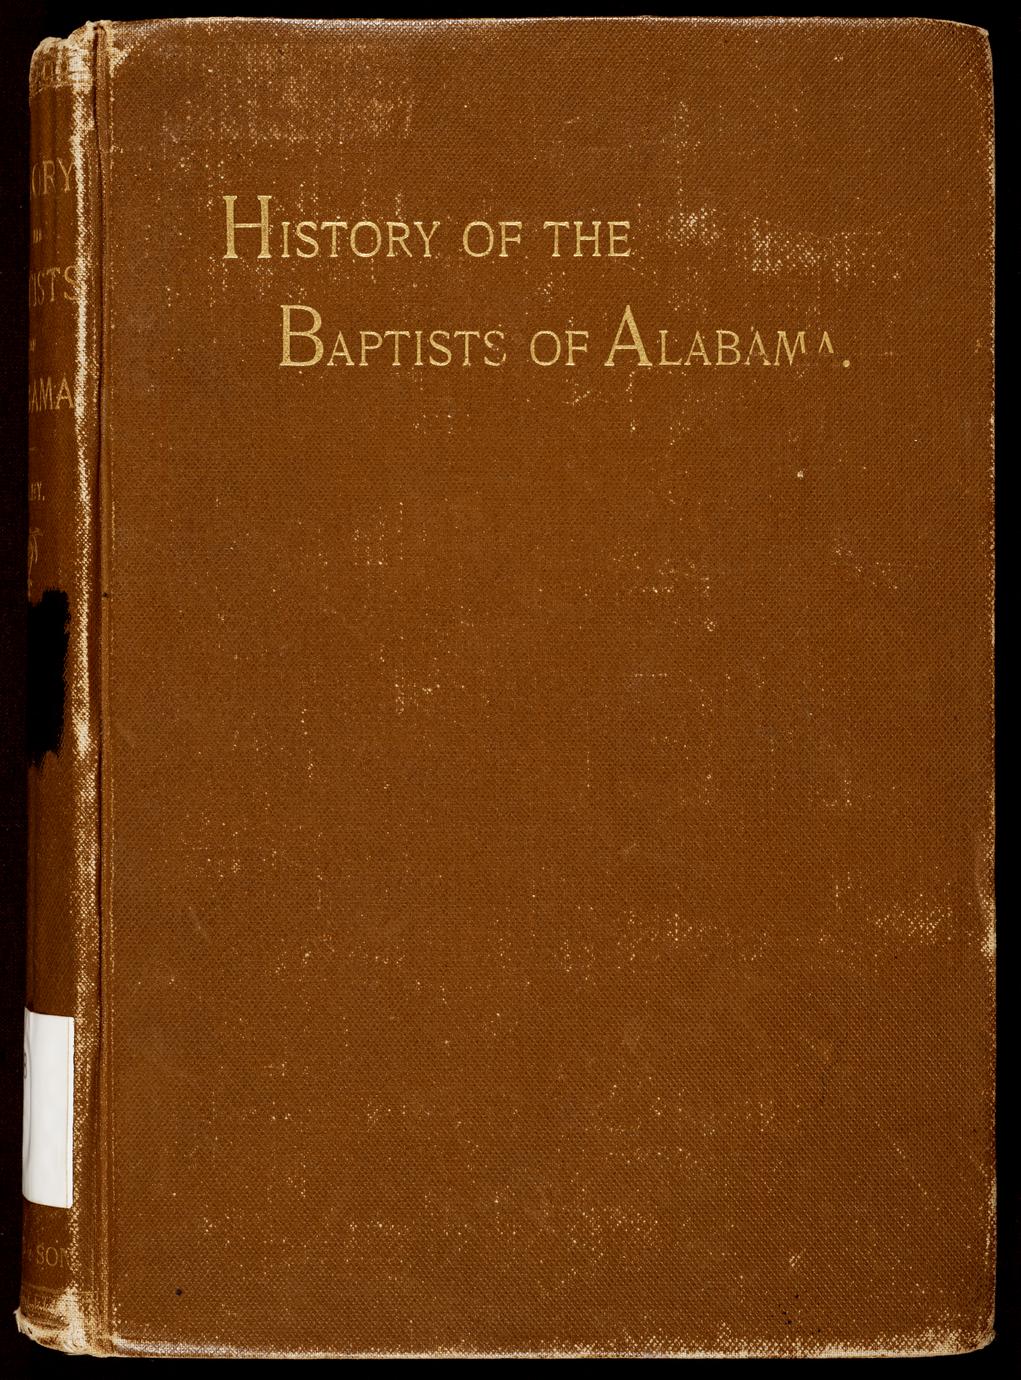 History of the Baptists of Alabama : from the time of their first occupation of Alabama in 1808, until 1894 : being a detailed record of denominational events in the state during eighty-six years, and furnishing biographical sketches of those who have been conspicuous in the annals of the denomination, besides much other incidental matter relative to the secular history of Alabama (1 of 2)